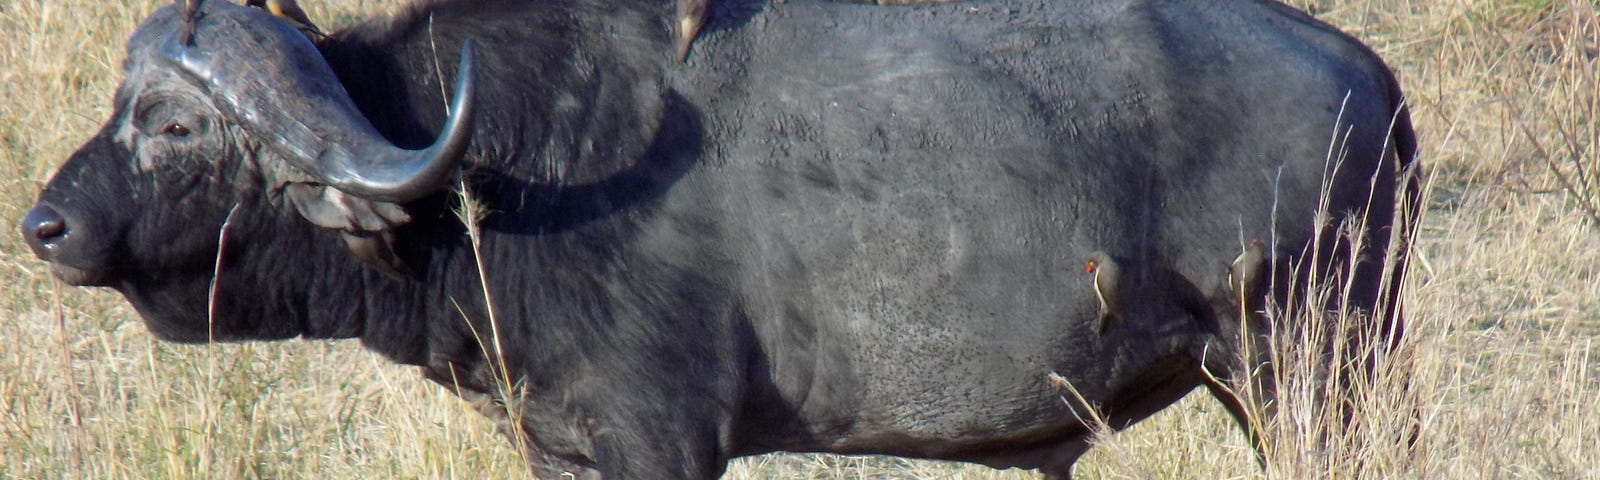 Author’s photo of a large black Cape buffalo standing alone in the Seregeti.